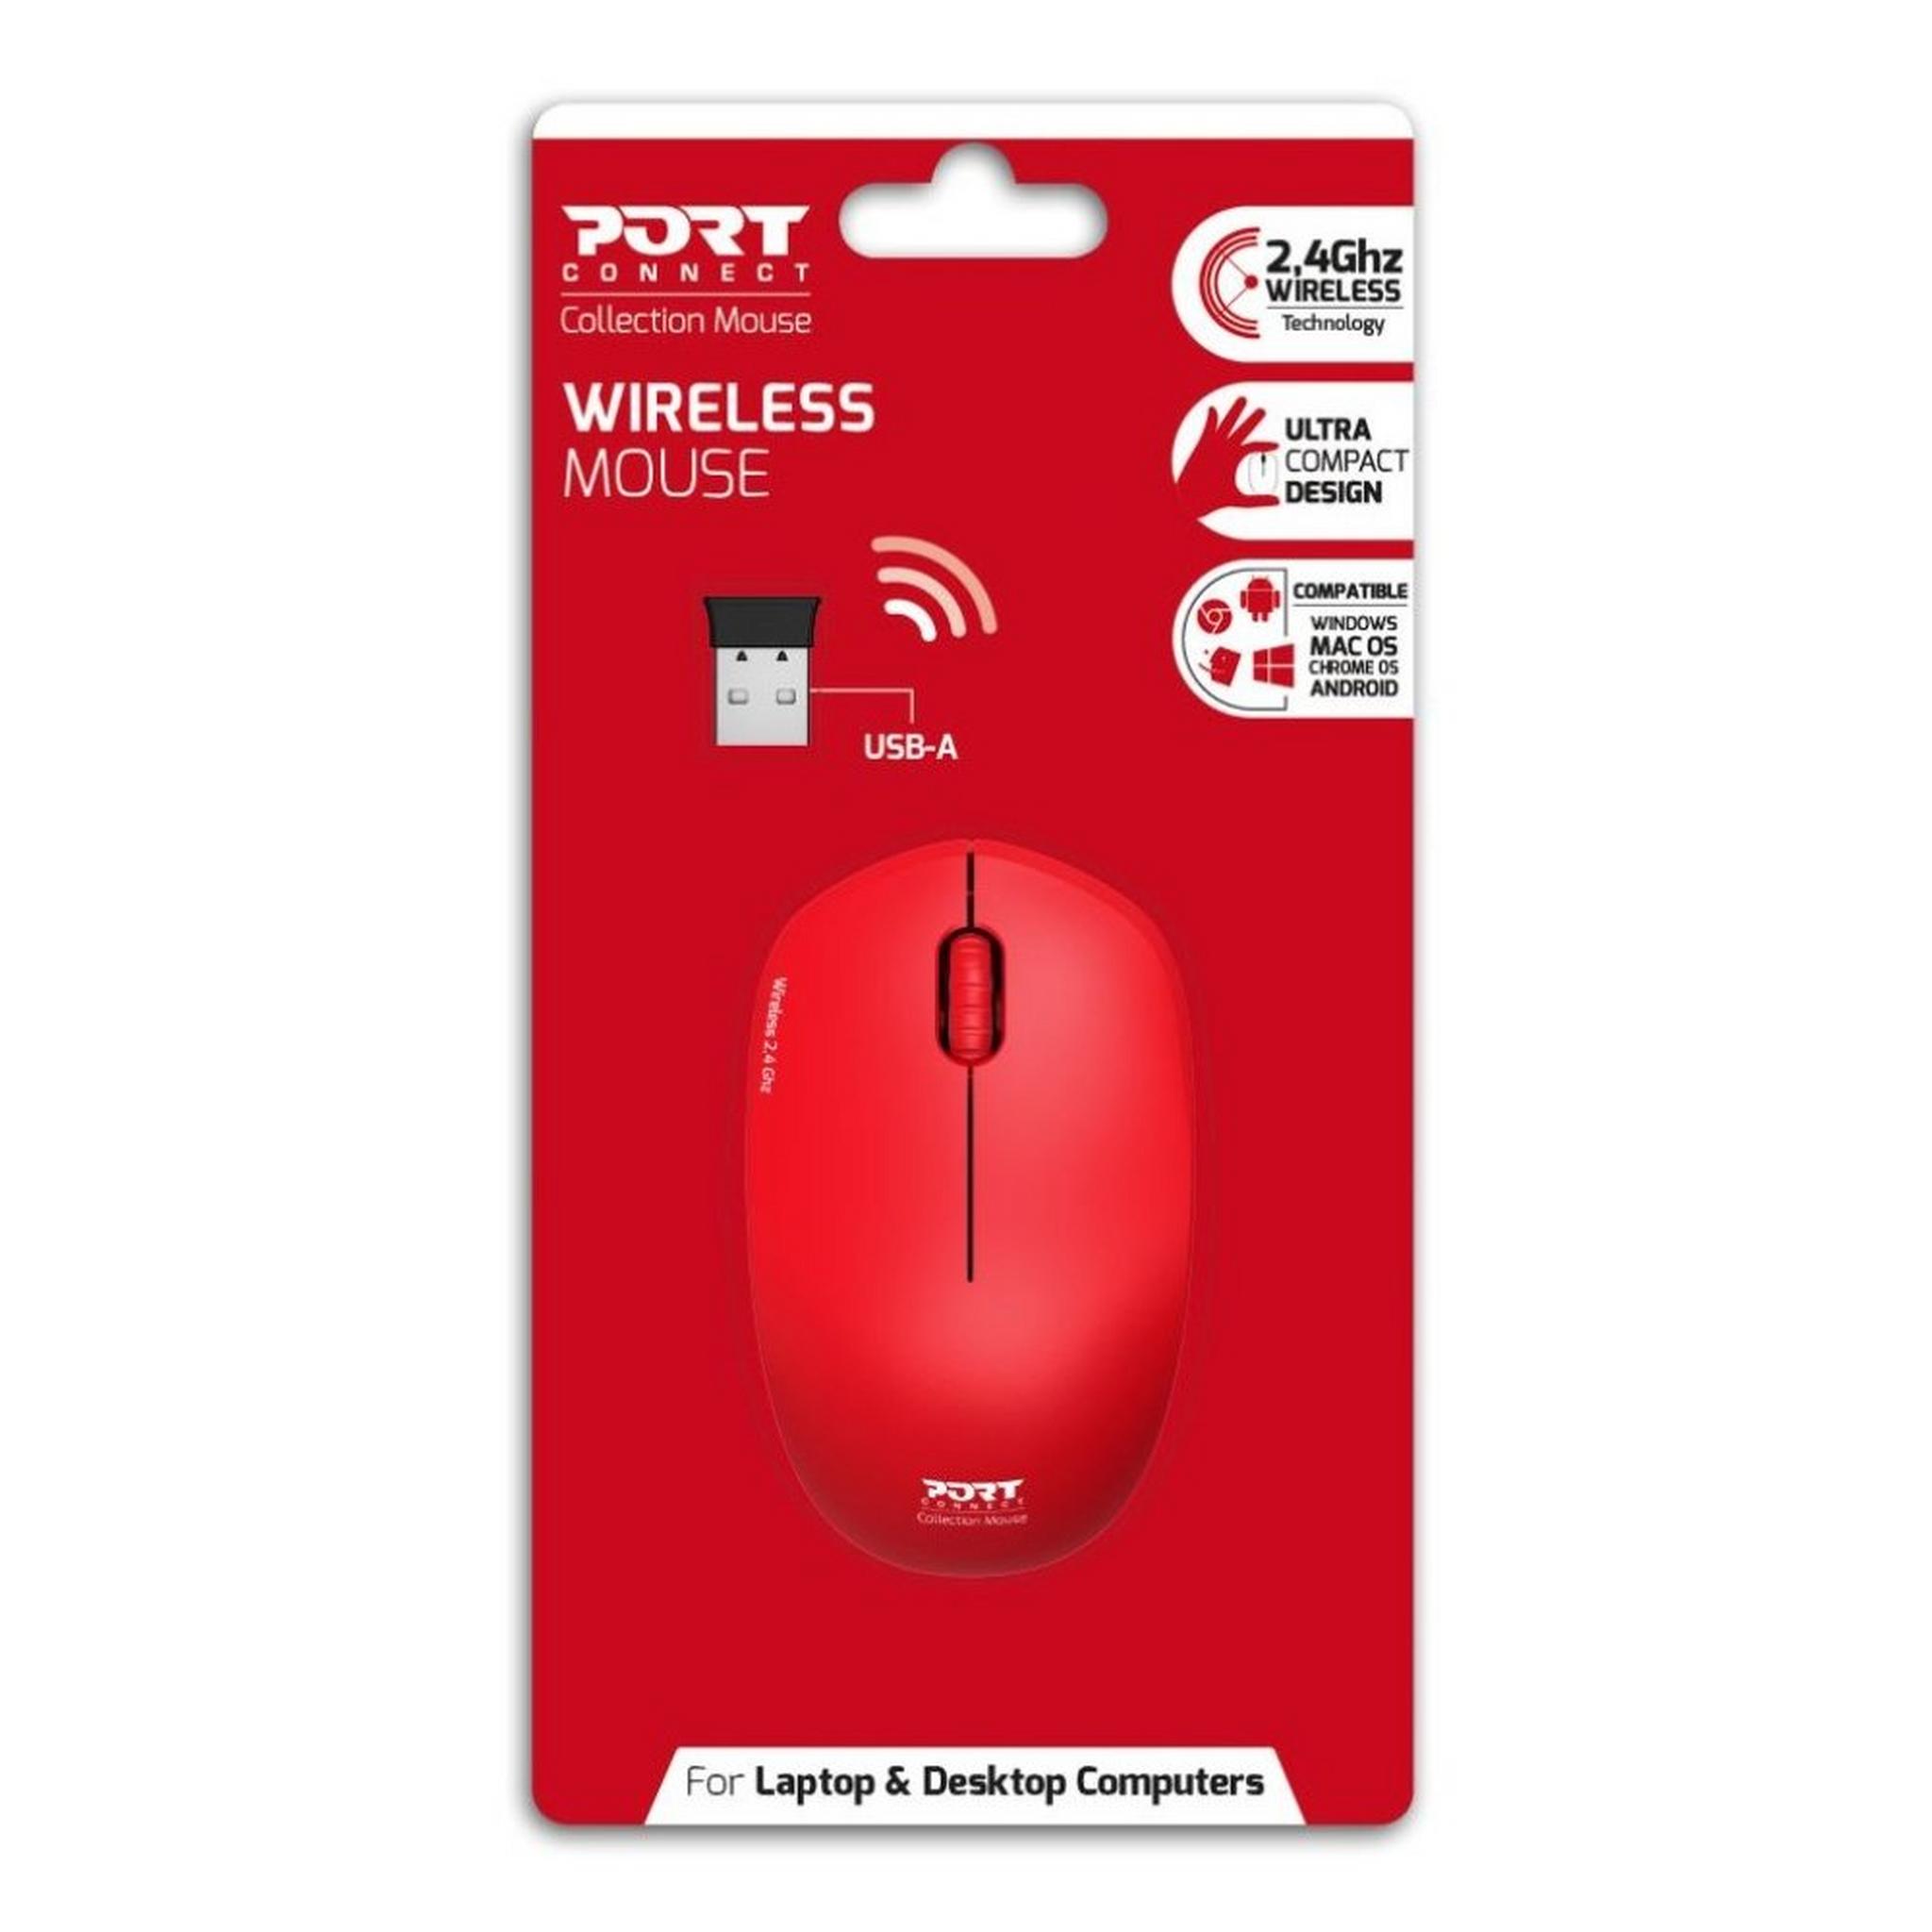 Port Mouse Collection Wireless - Red (900537)